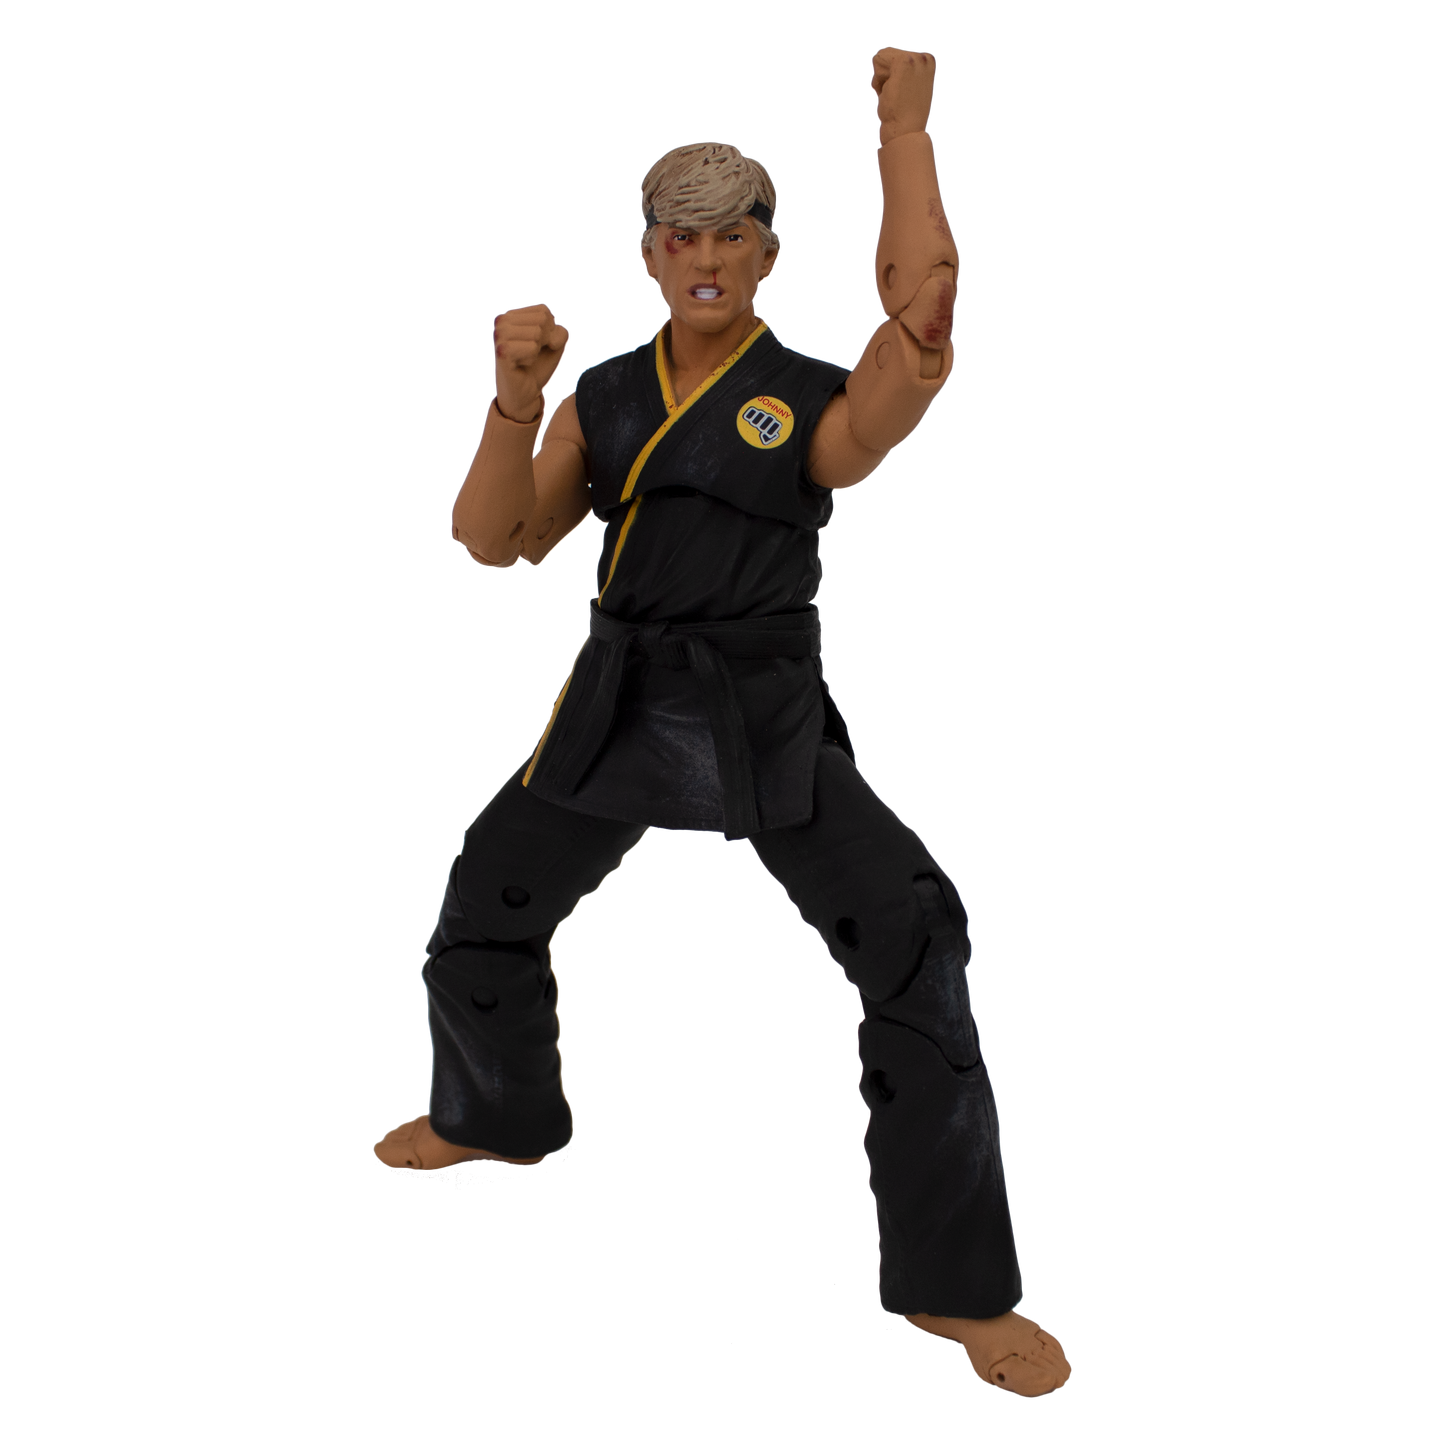 The Karate Kid Battle Damaged Johnny Lawrence Action Figure - Books A Million Exclusive - Icon Heroes 